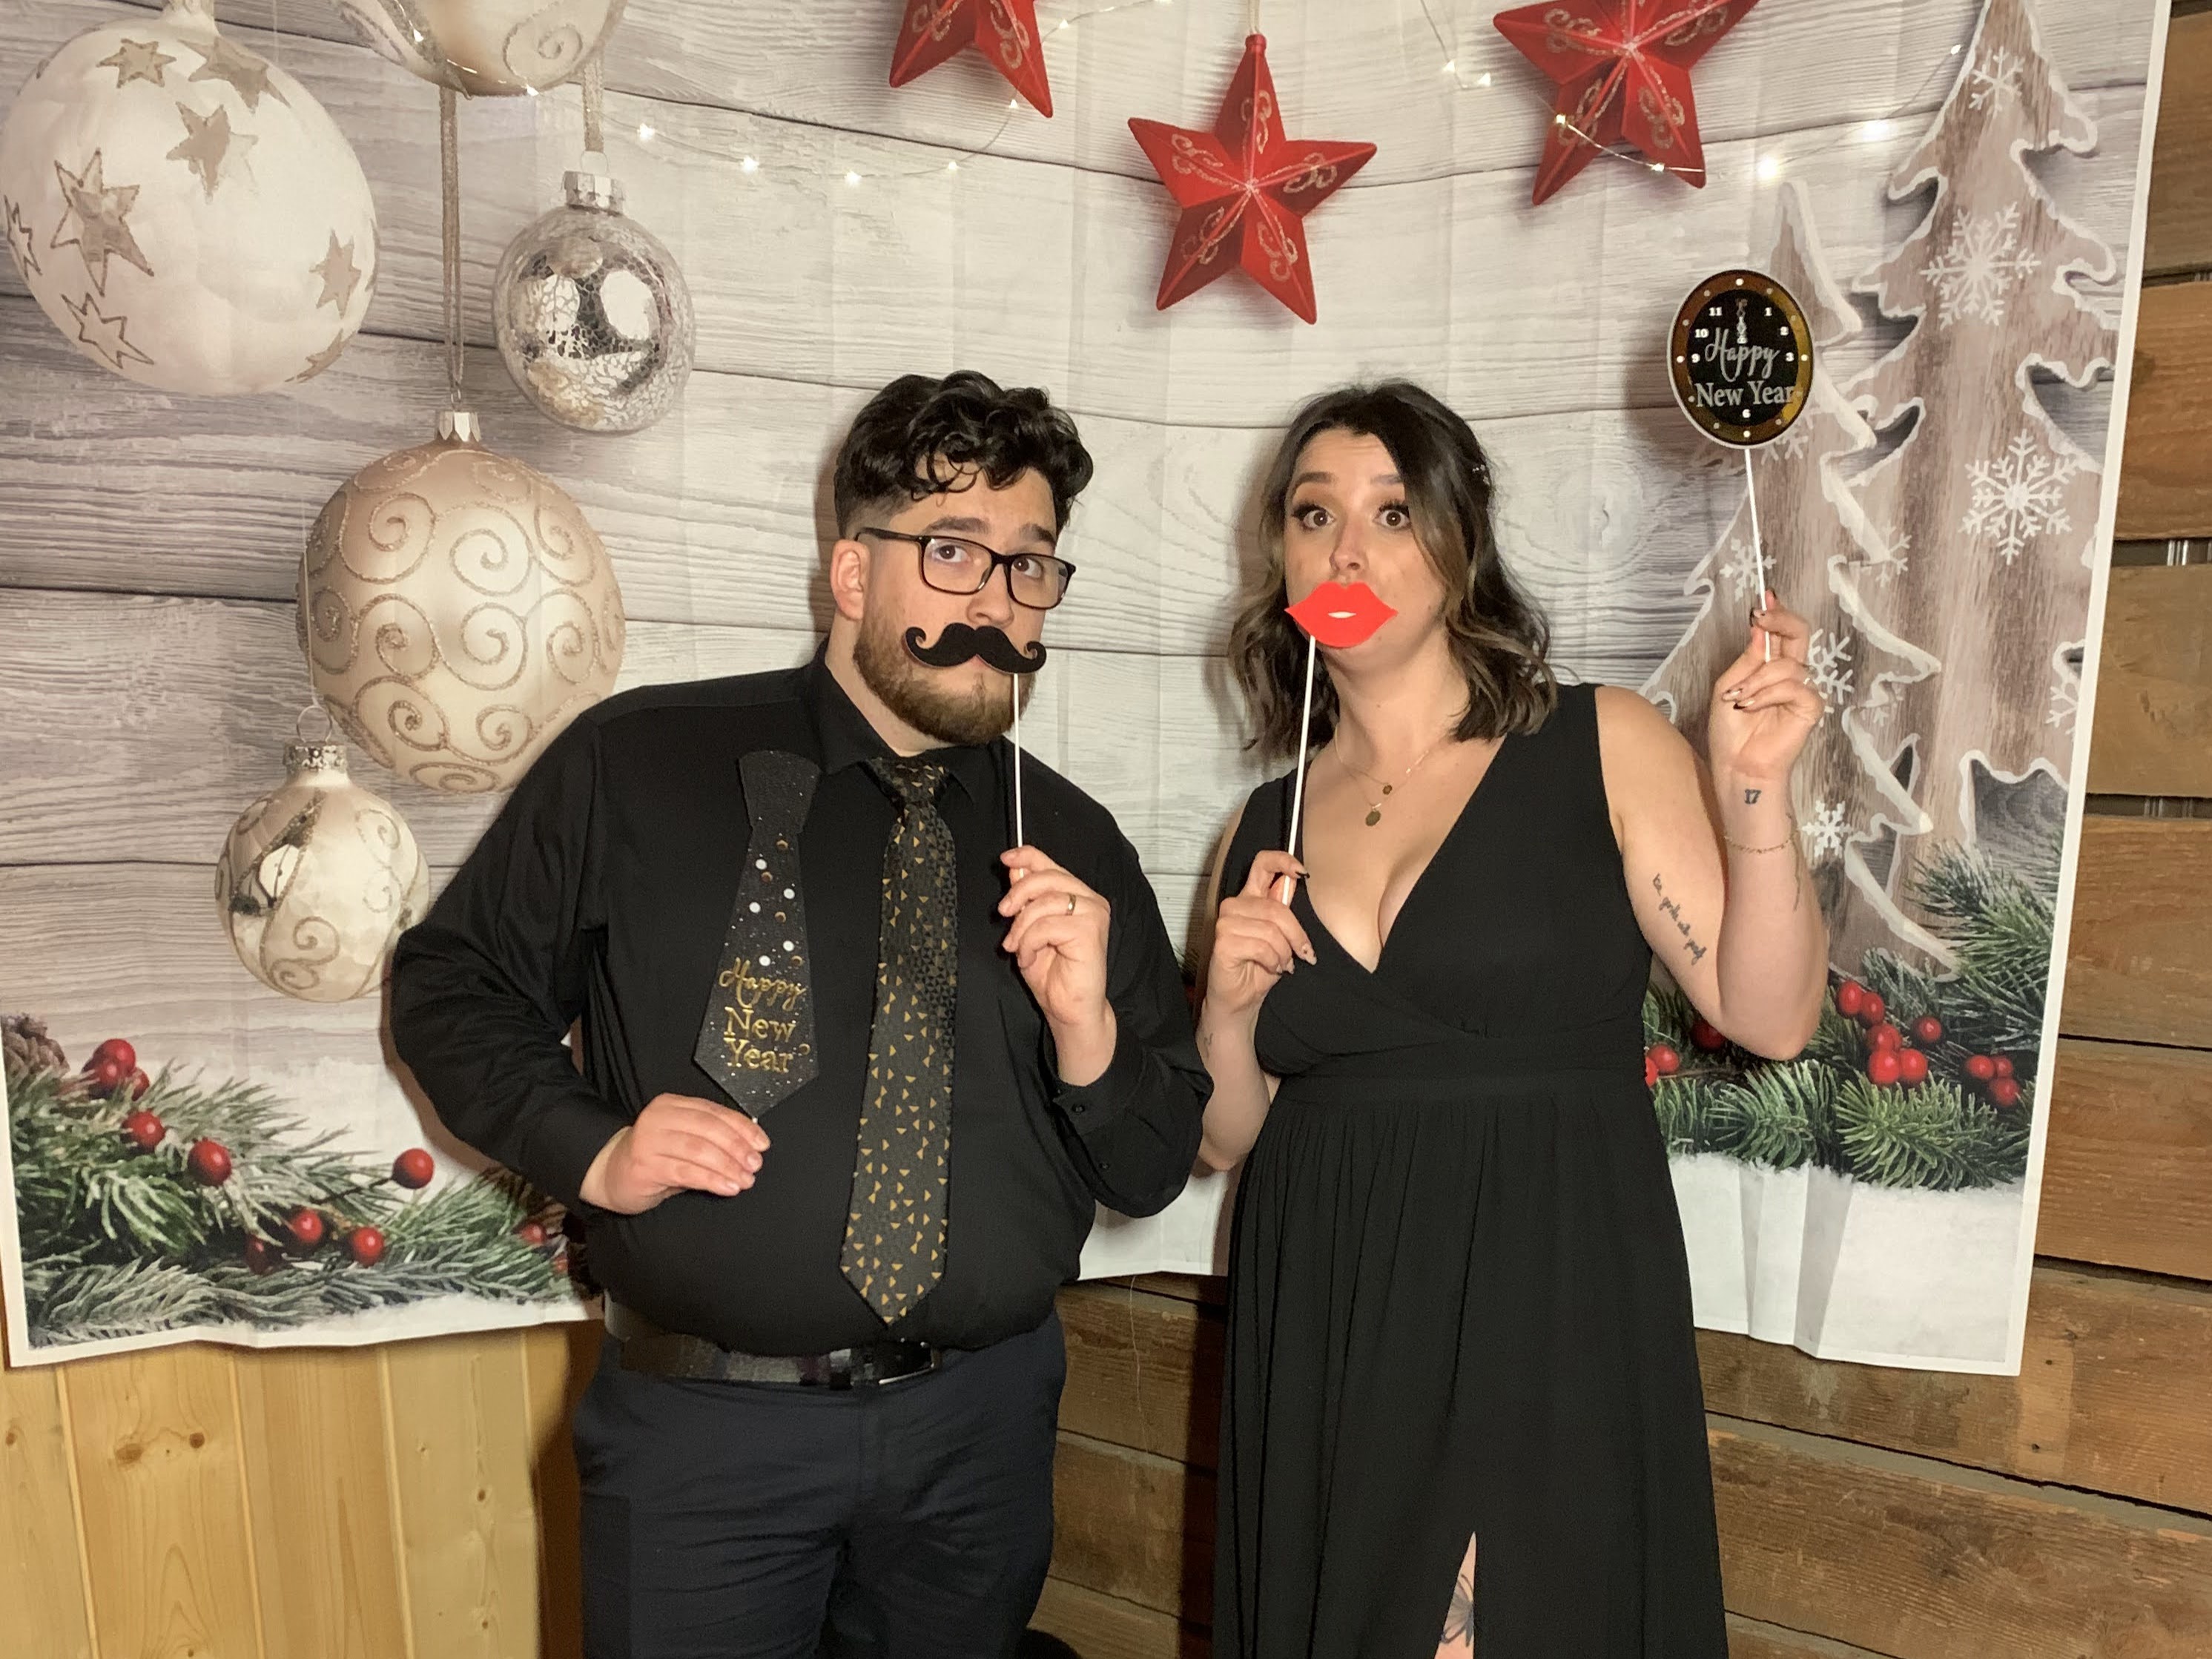 My wife and I posing with some goofy happy new years props. I'm wearing a black dress shirt, tie, and pants. My wife is wearing a black dress.